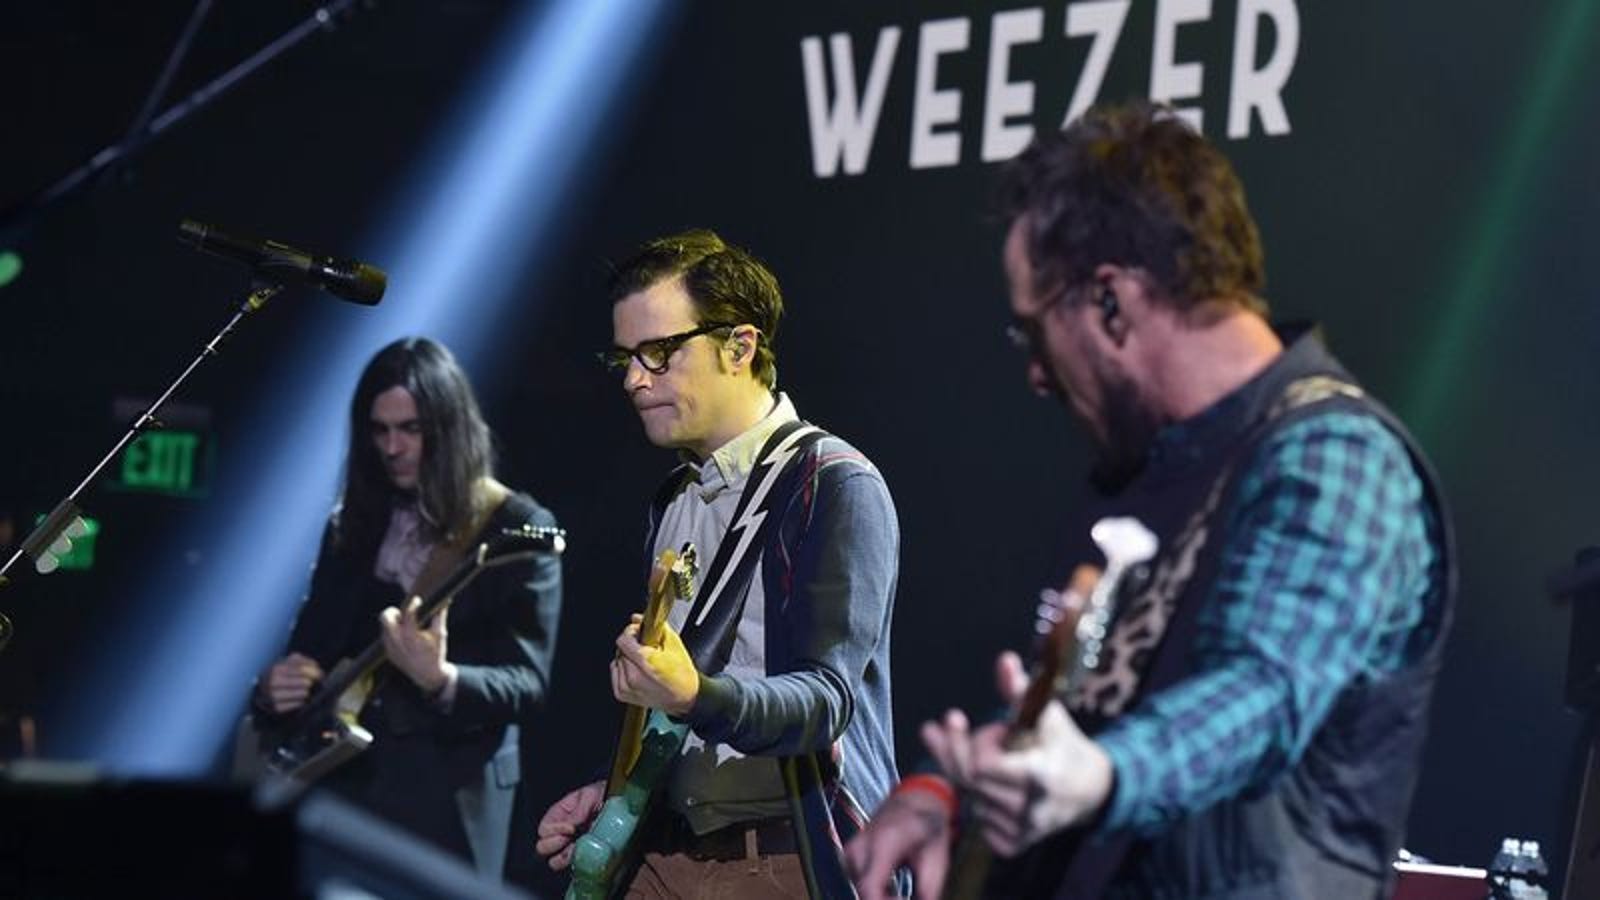 14 Things You Probably Didn’t Know About Weezer